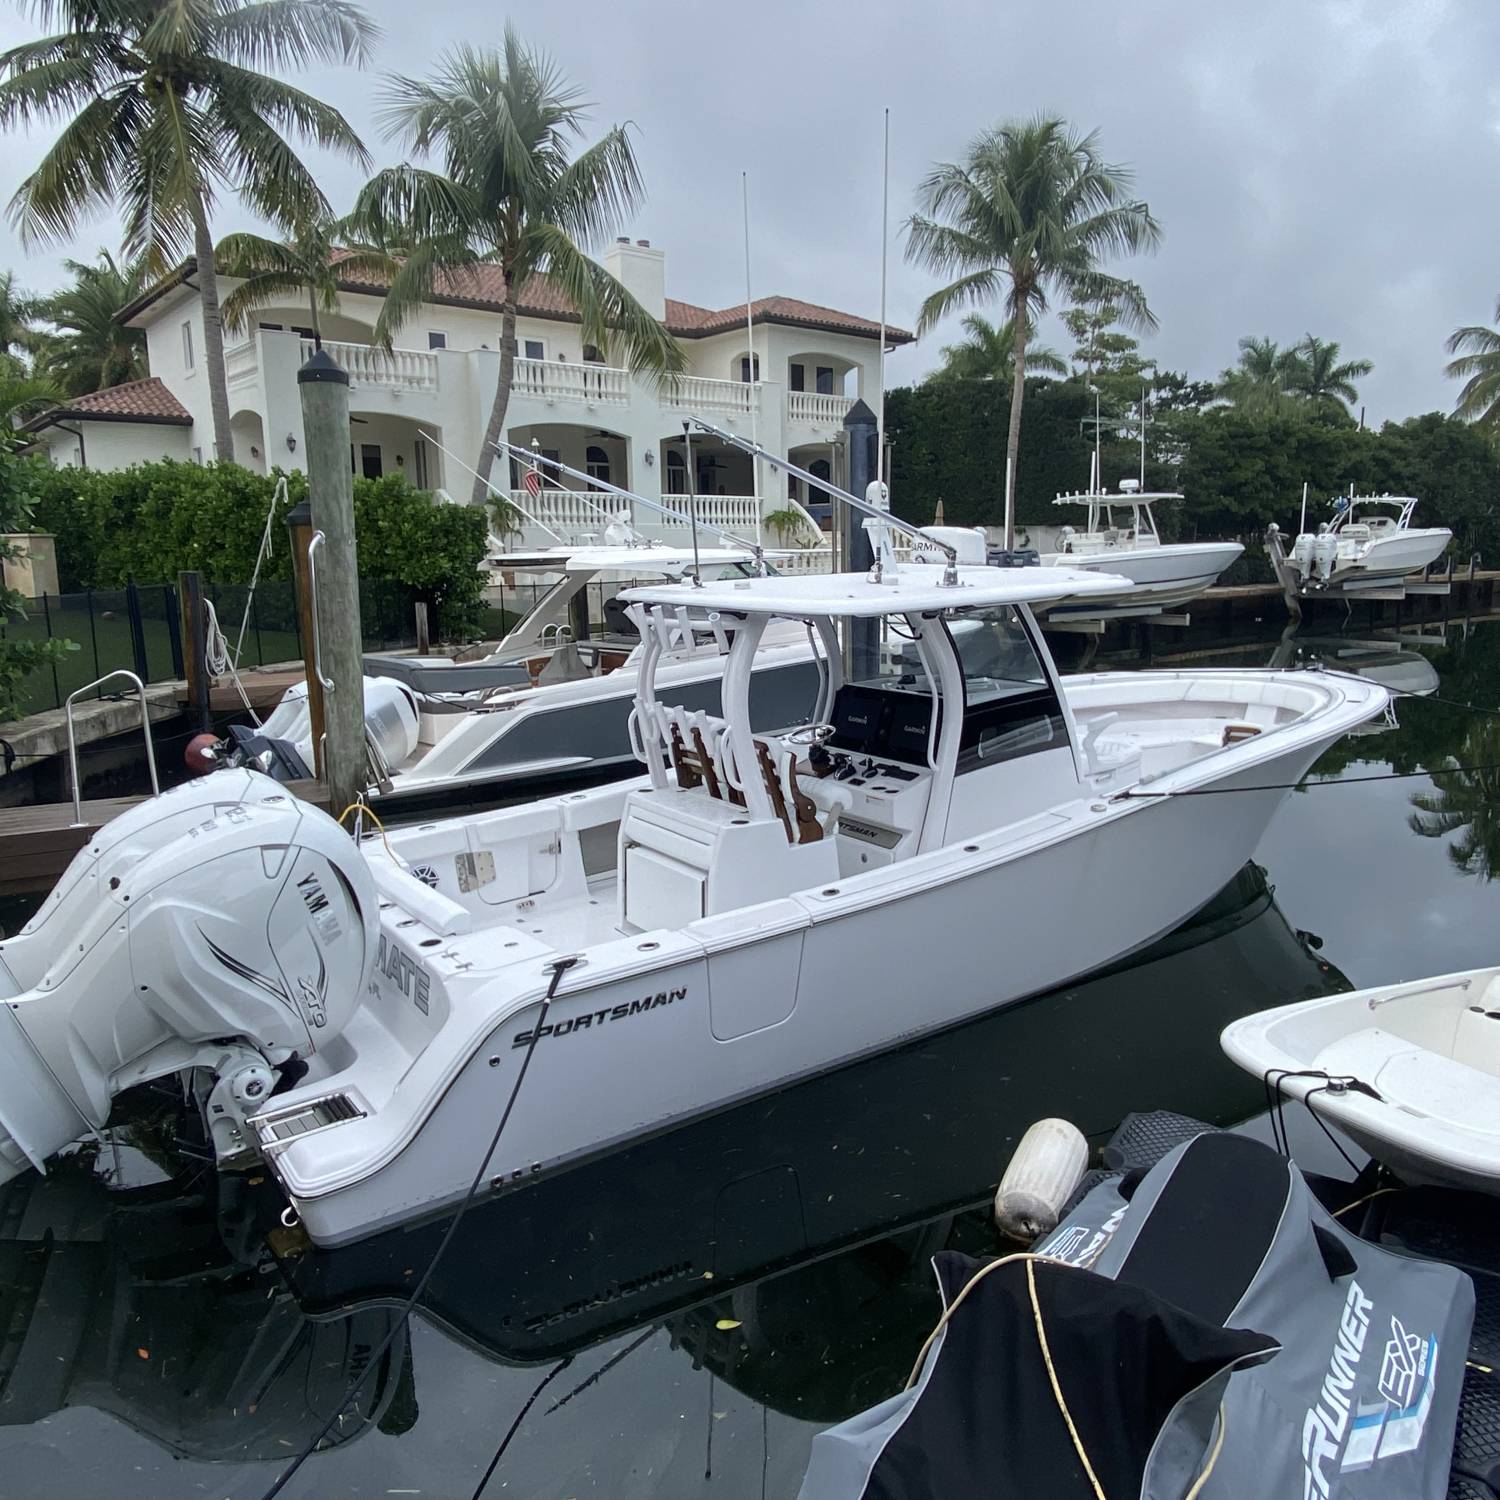 Title: In love - On board their Sportsman Open 322 Center Console - Location: Coral Gables, FL. Participating in the Photo Contest #SportsmanApril2023